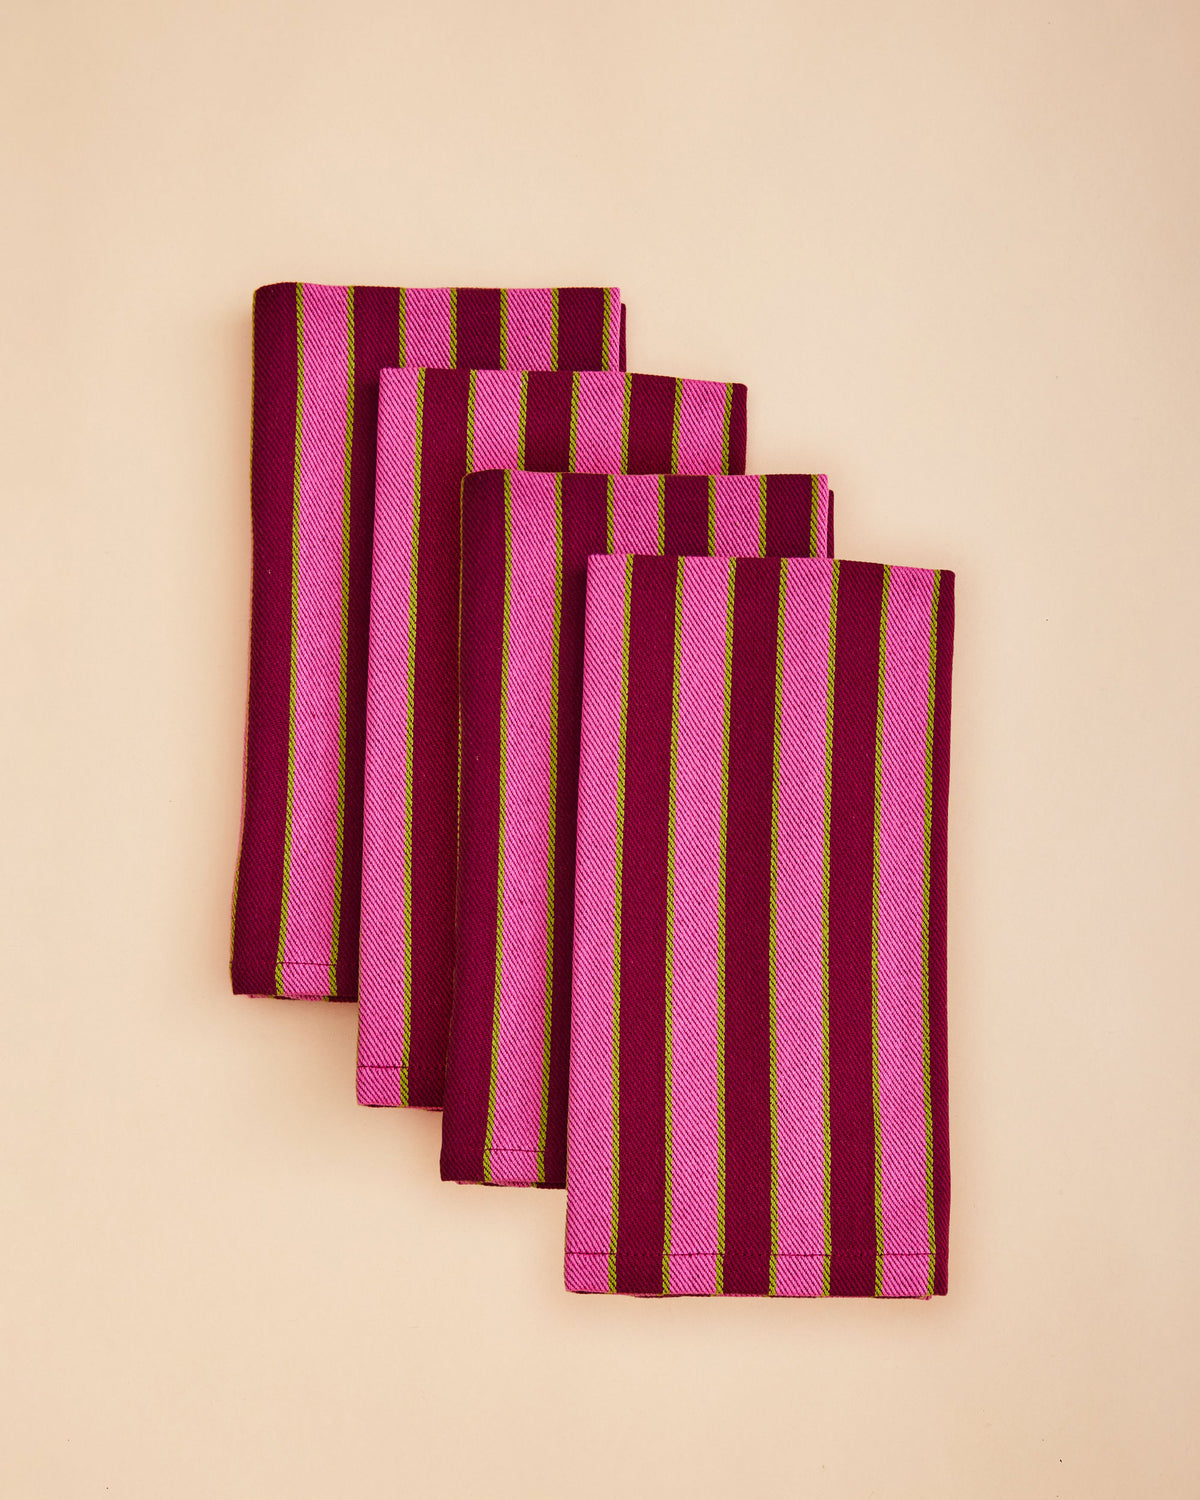 Dusen Dusen Herb Stripe Napkins. Single or Set of 4 napkins in mix and match striped patterns. 100% cotton, twill weave, 20"x20". Machine wash cold and tumble dry low. Iron as needed. Made in India.